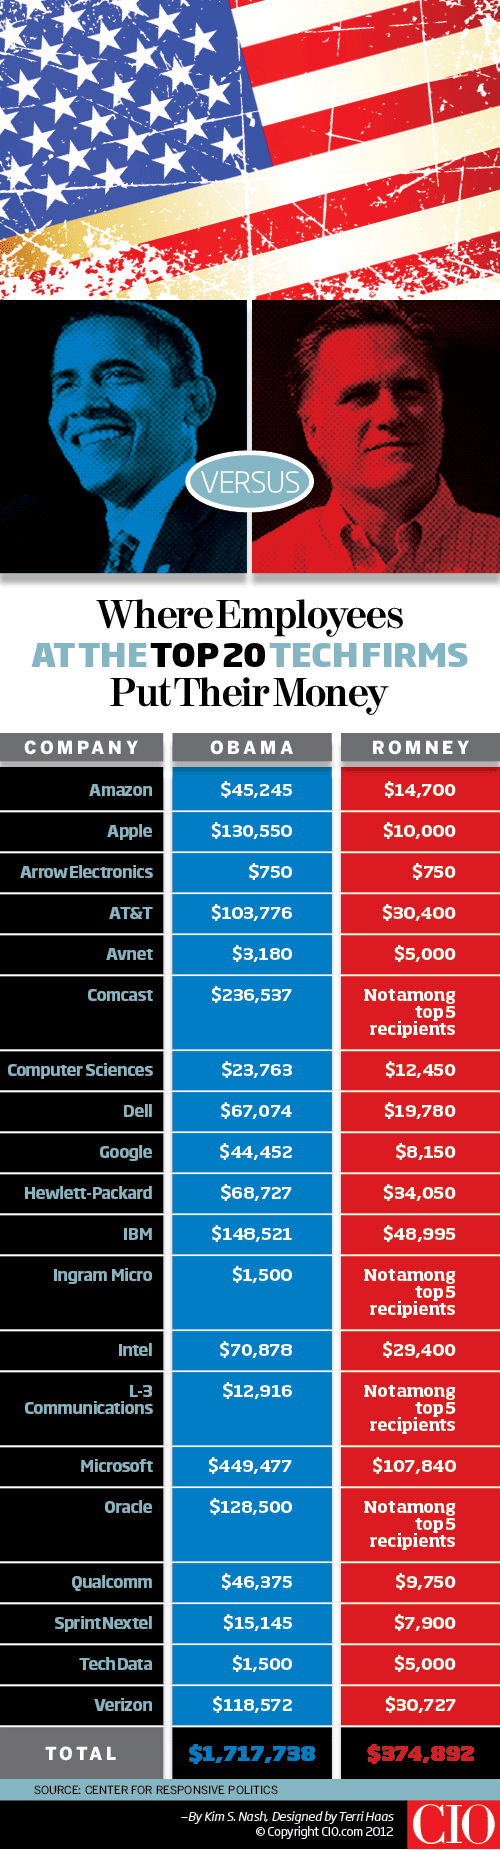 Where Employees at Leading Tech Firms Put Their Political Donations